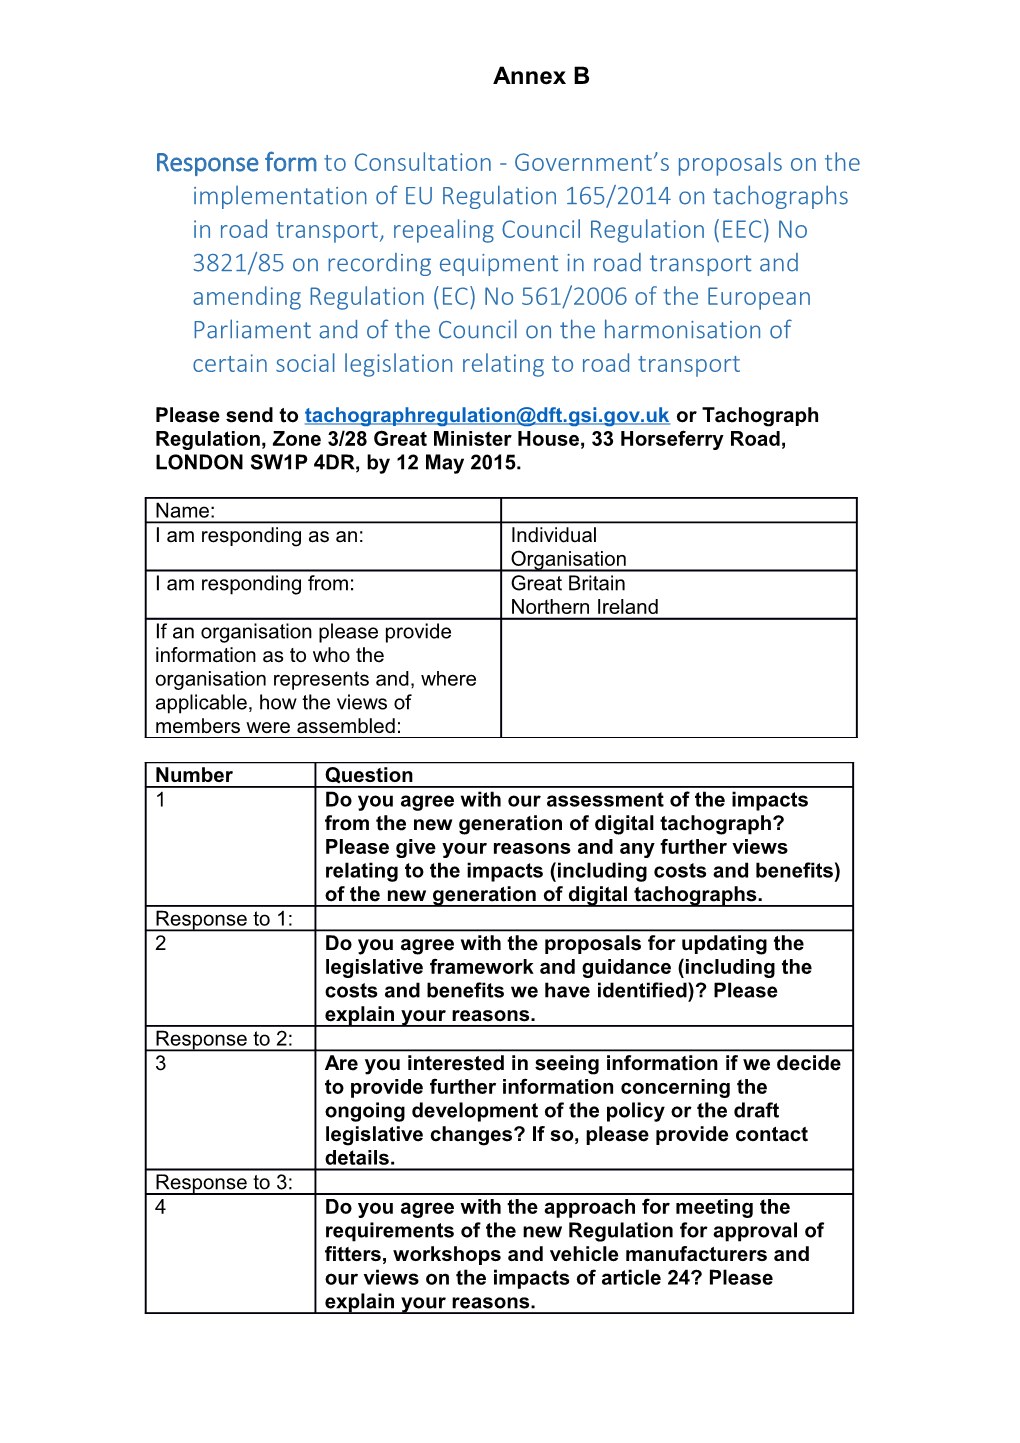 Response Form to Consultation - Government S Proposals on the Implementation of EU Regulation